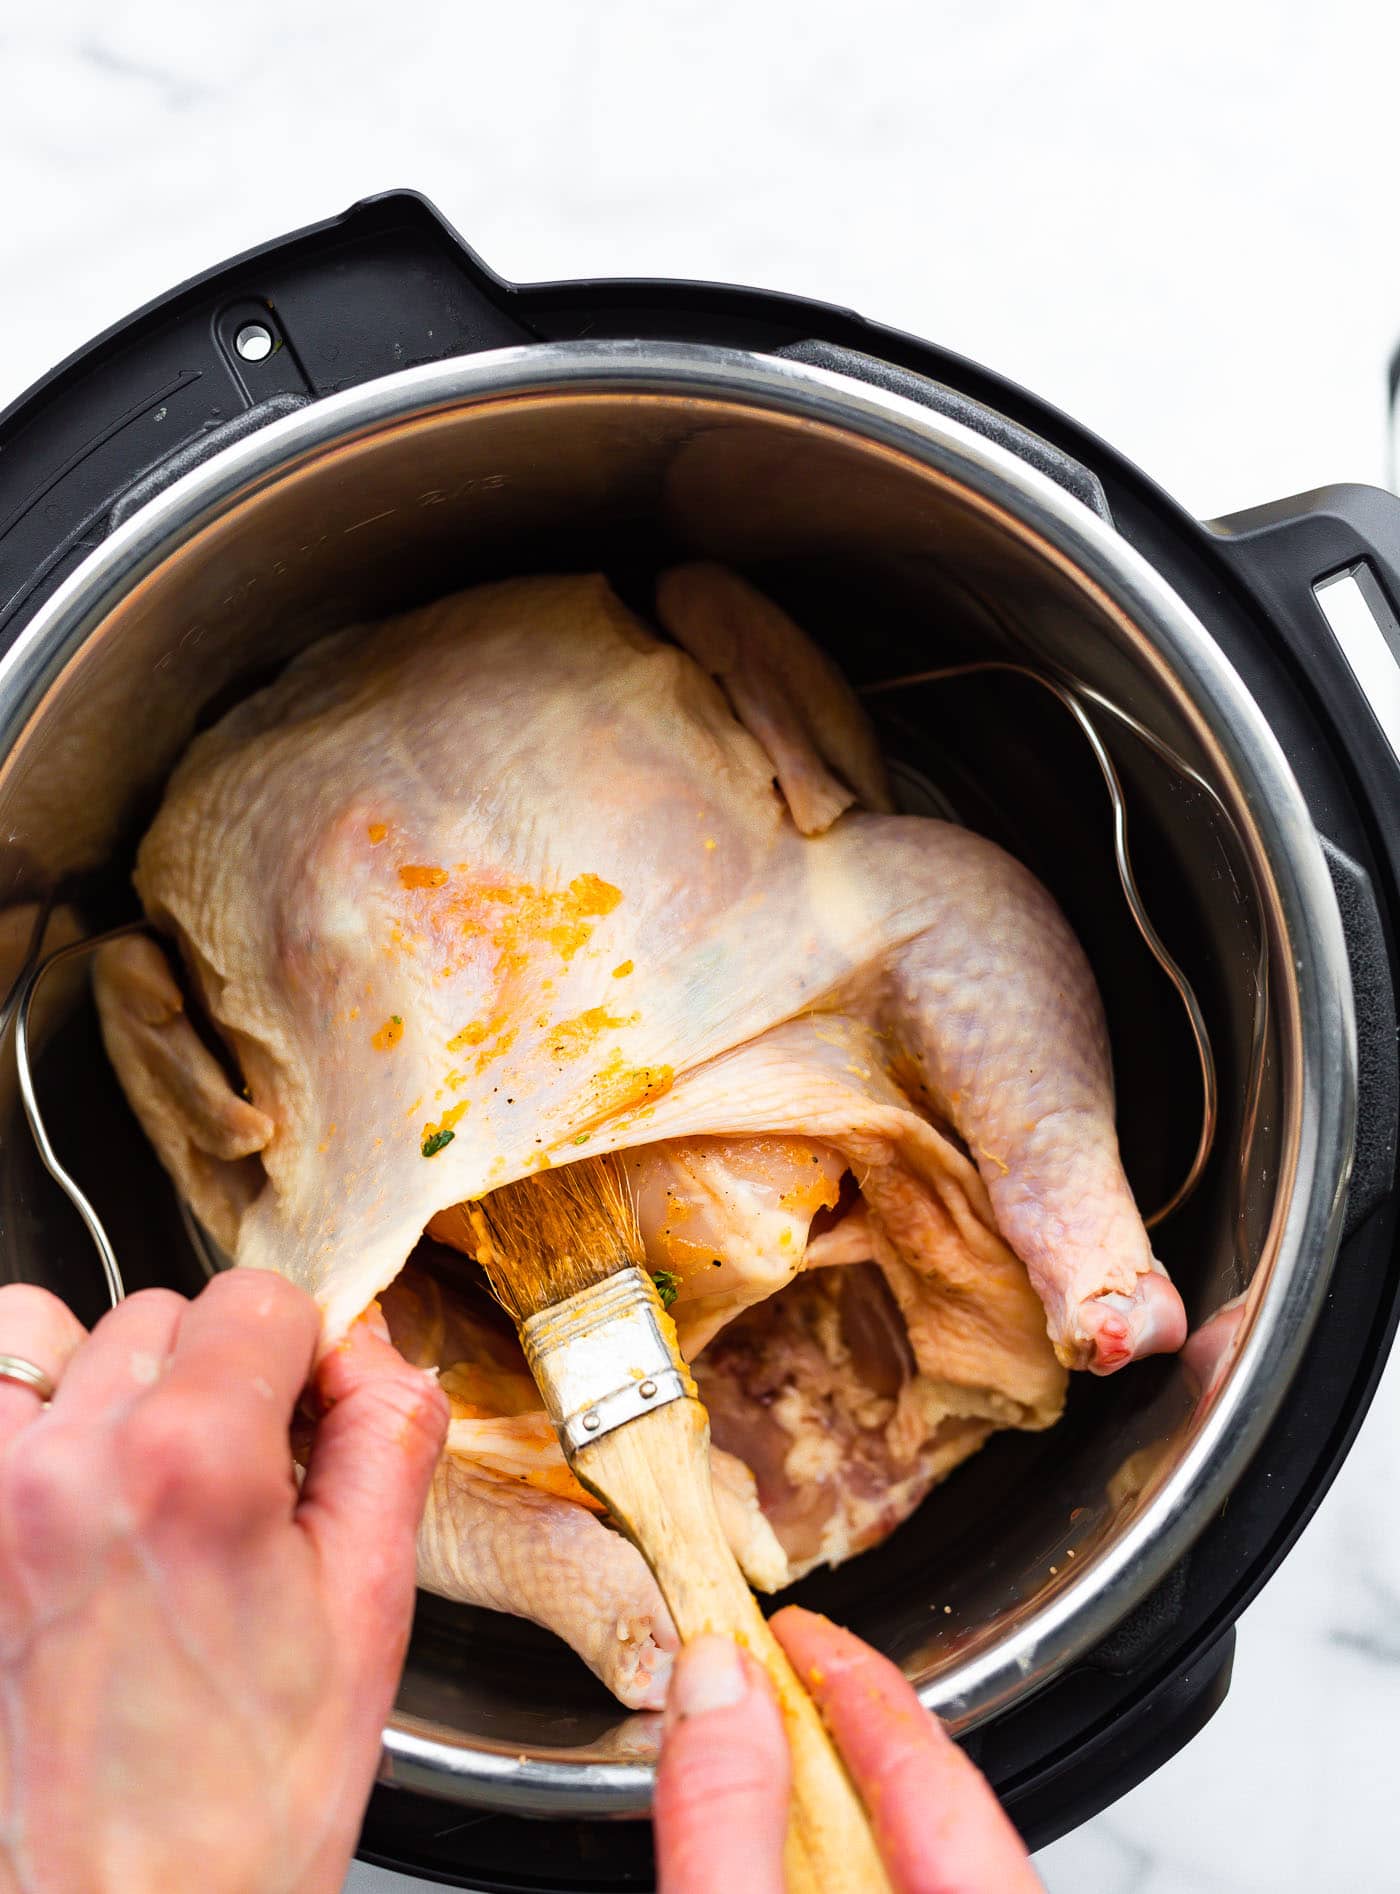 a whole chicken in an instant pot with a woman's hands holding the skin from the meat and using a brush to brush marinade onto the meat near the legs of the chicken